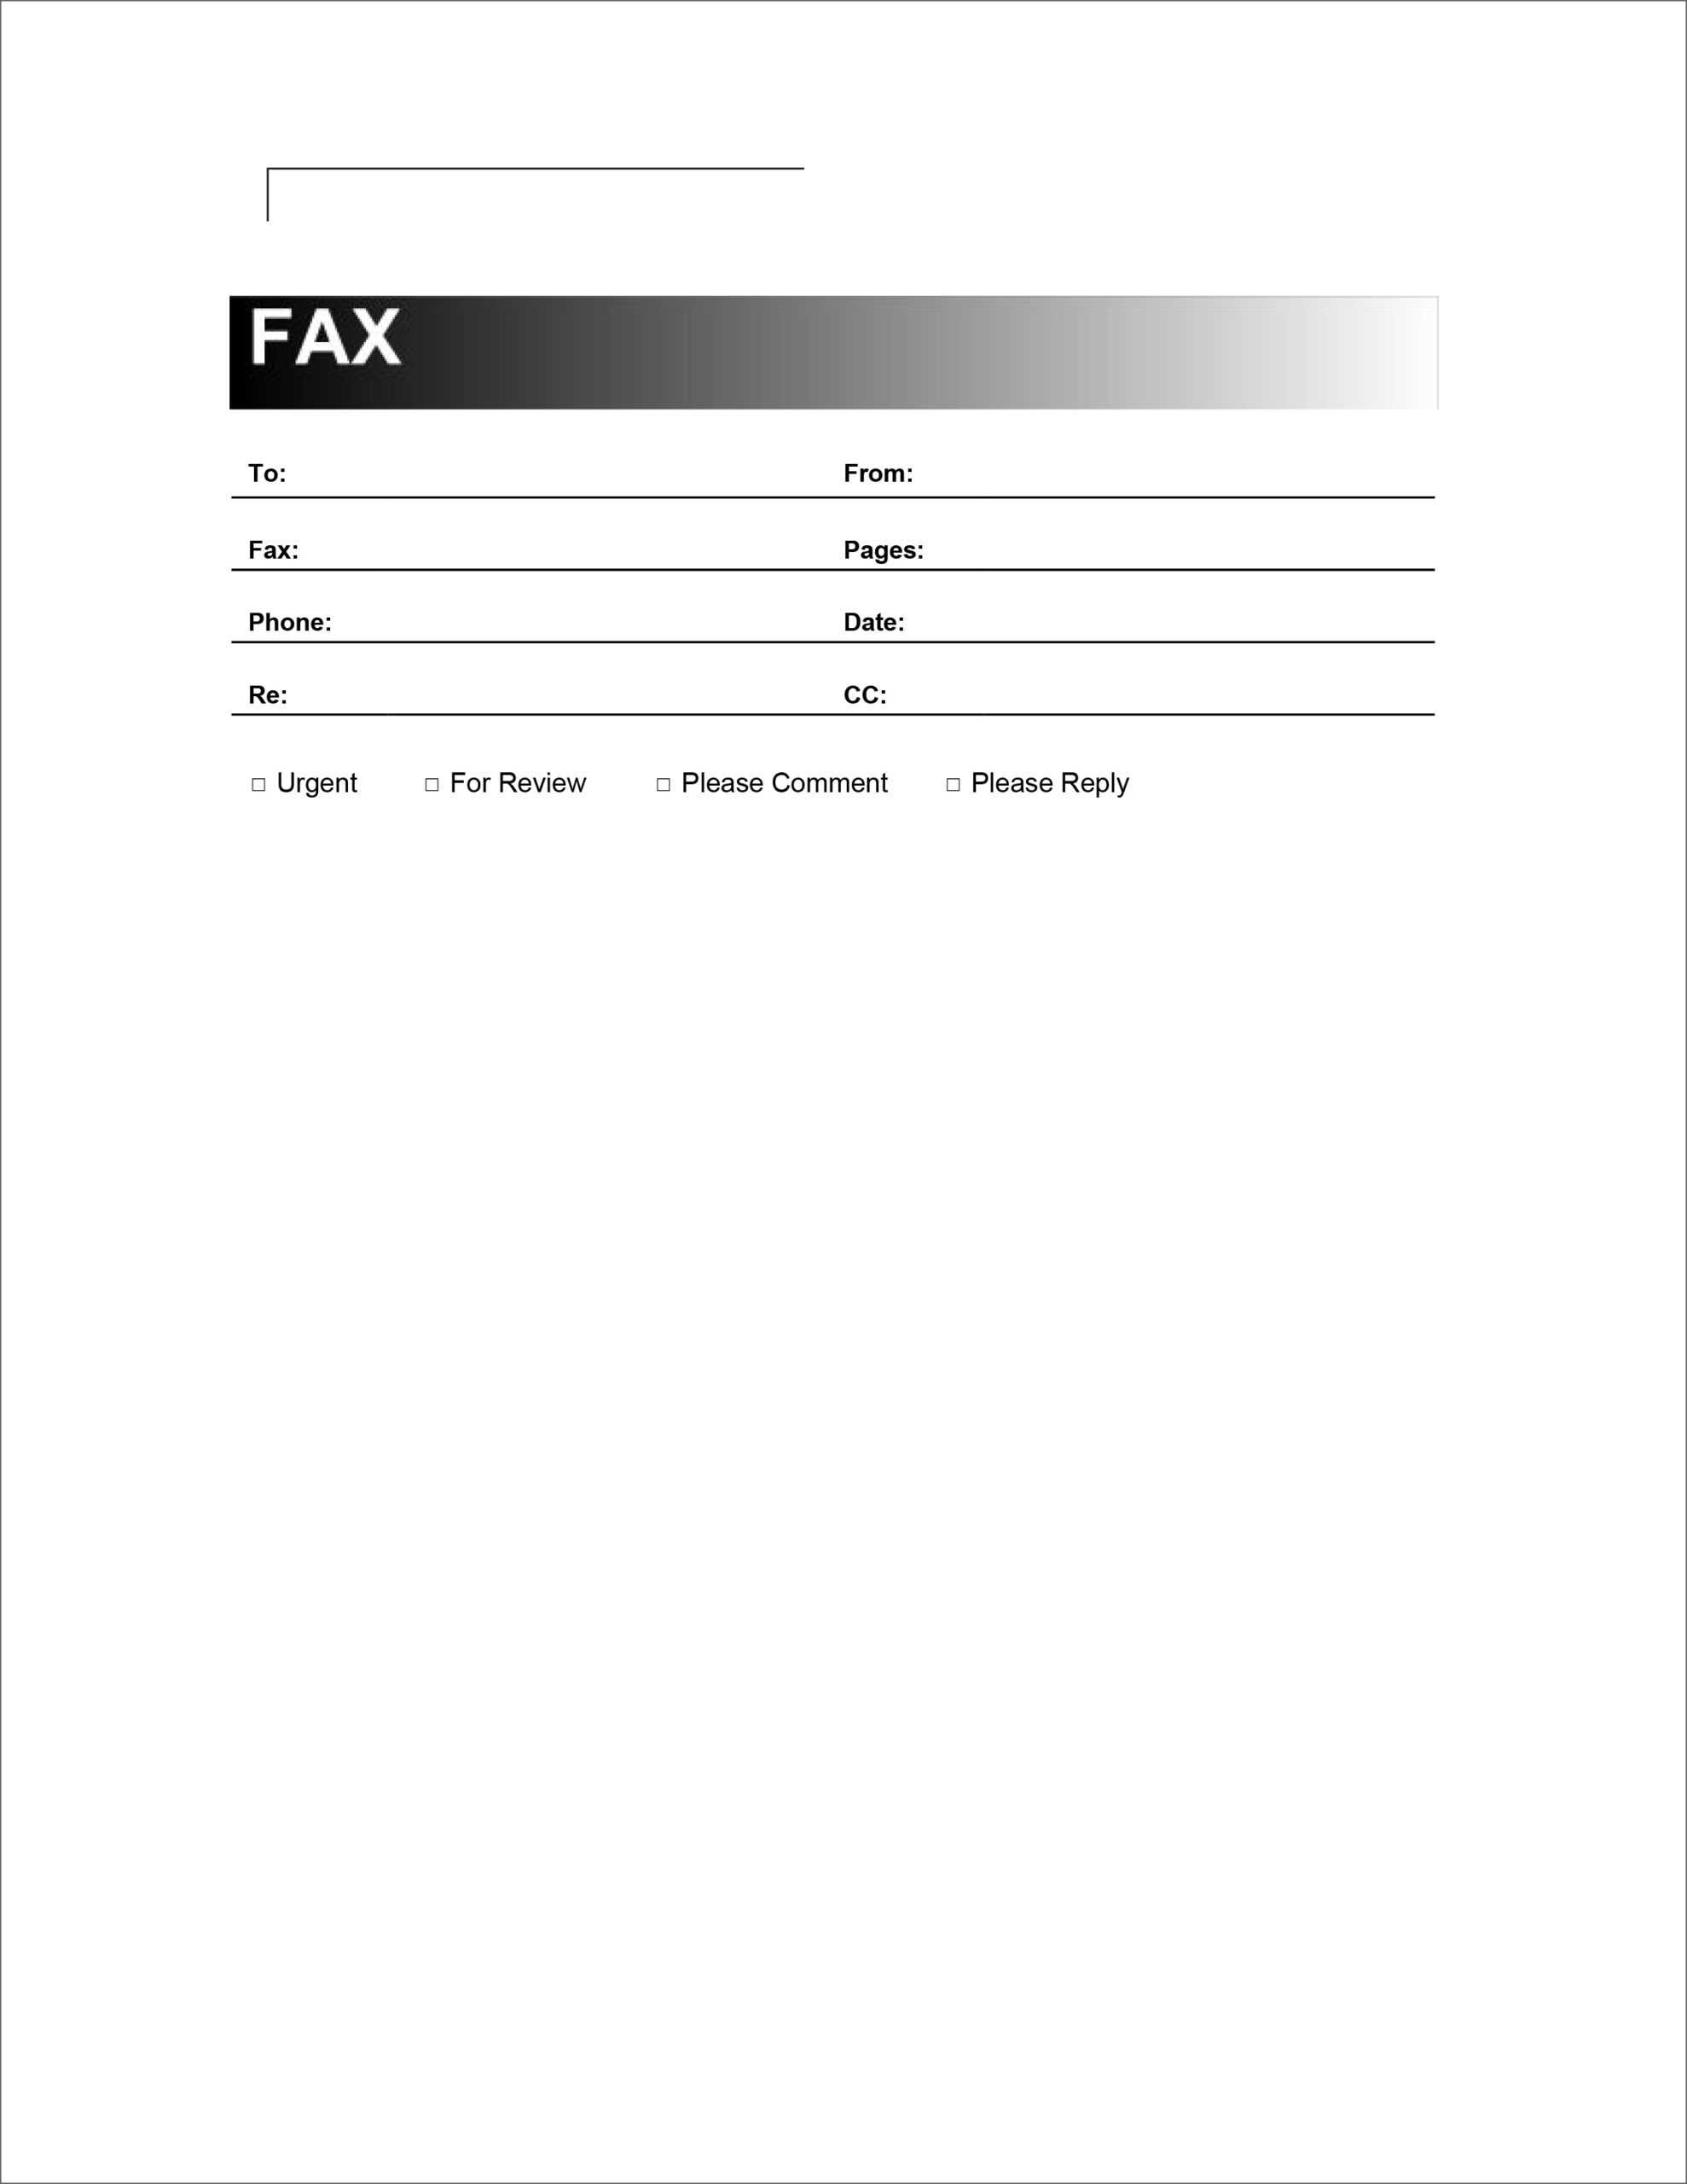 Fax Templates In Word – Dalep.midnightpig.co Regarding Fax Cover Sheet Template Word 2010